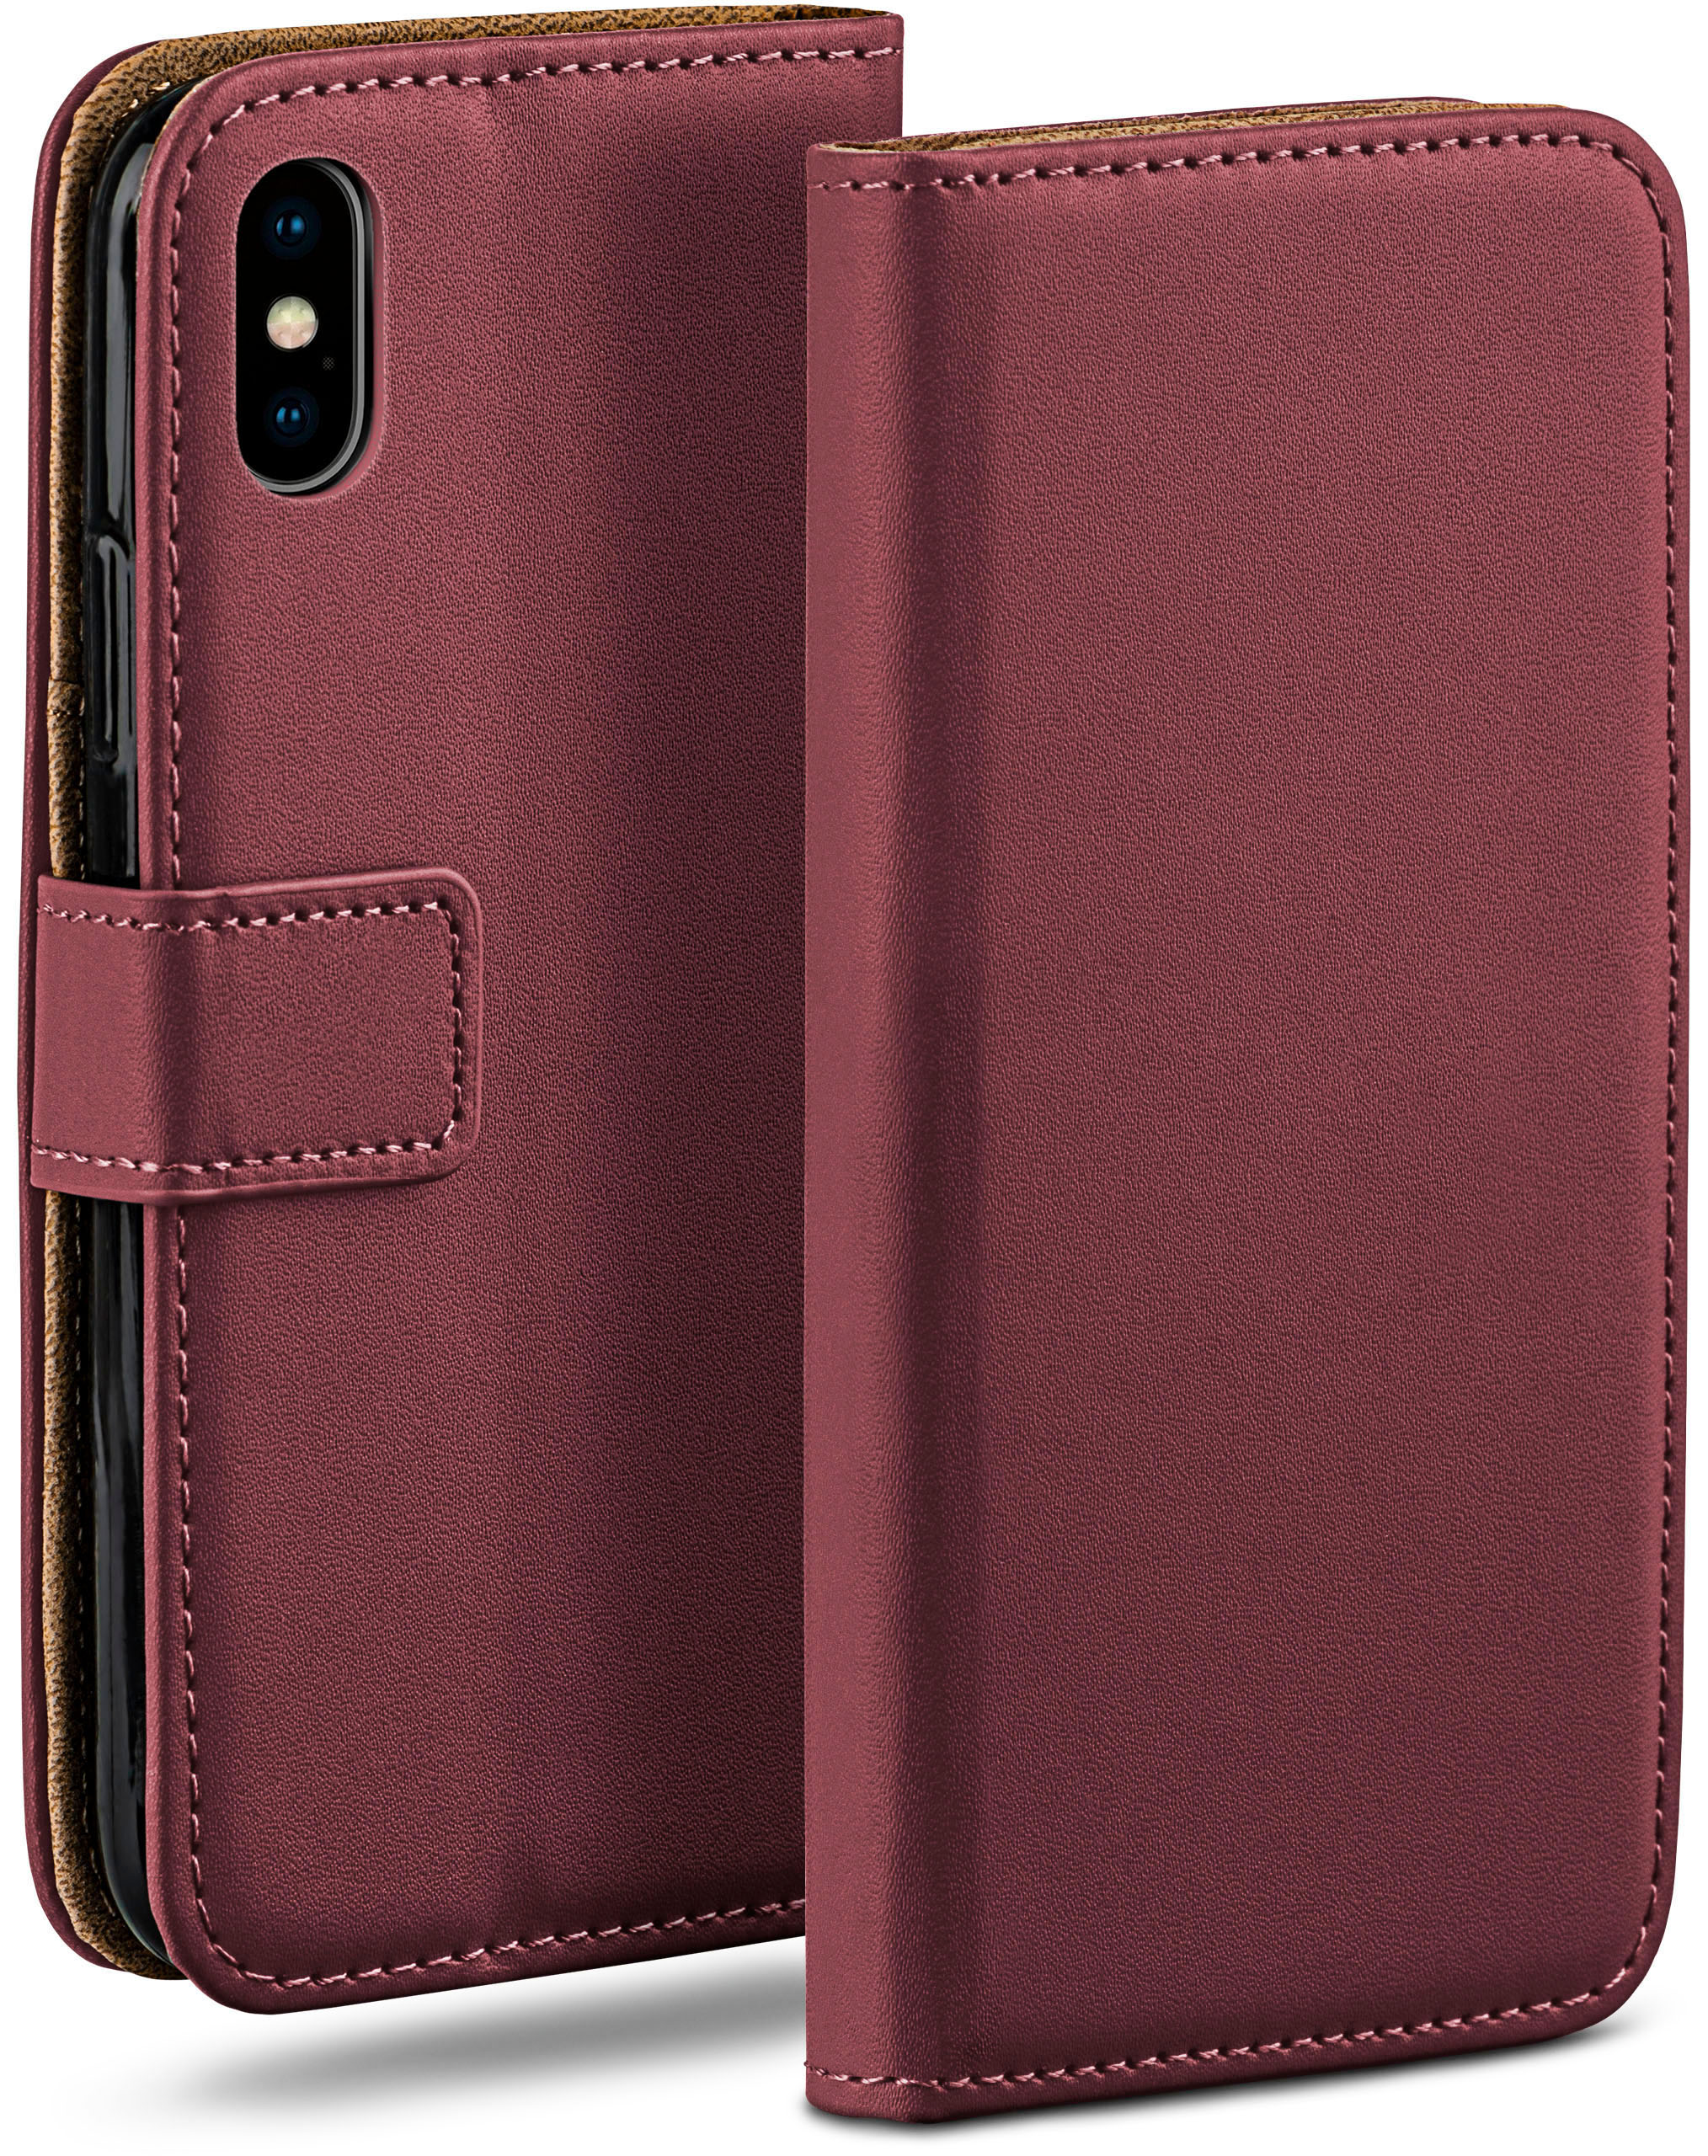 Bookcover, MOEX Case, / X iPhone iPhone Book Maroon-Red Apple, XS,